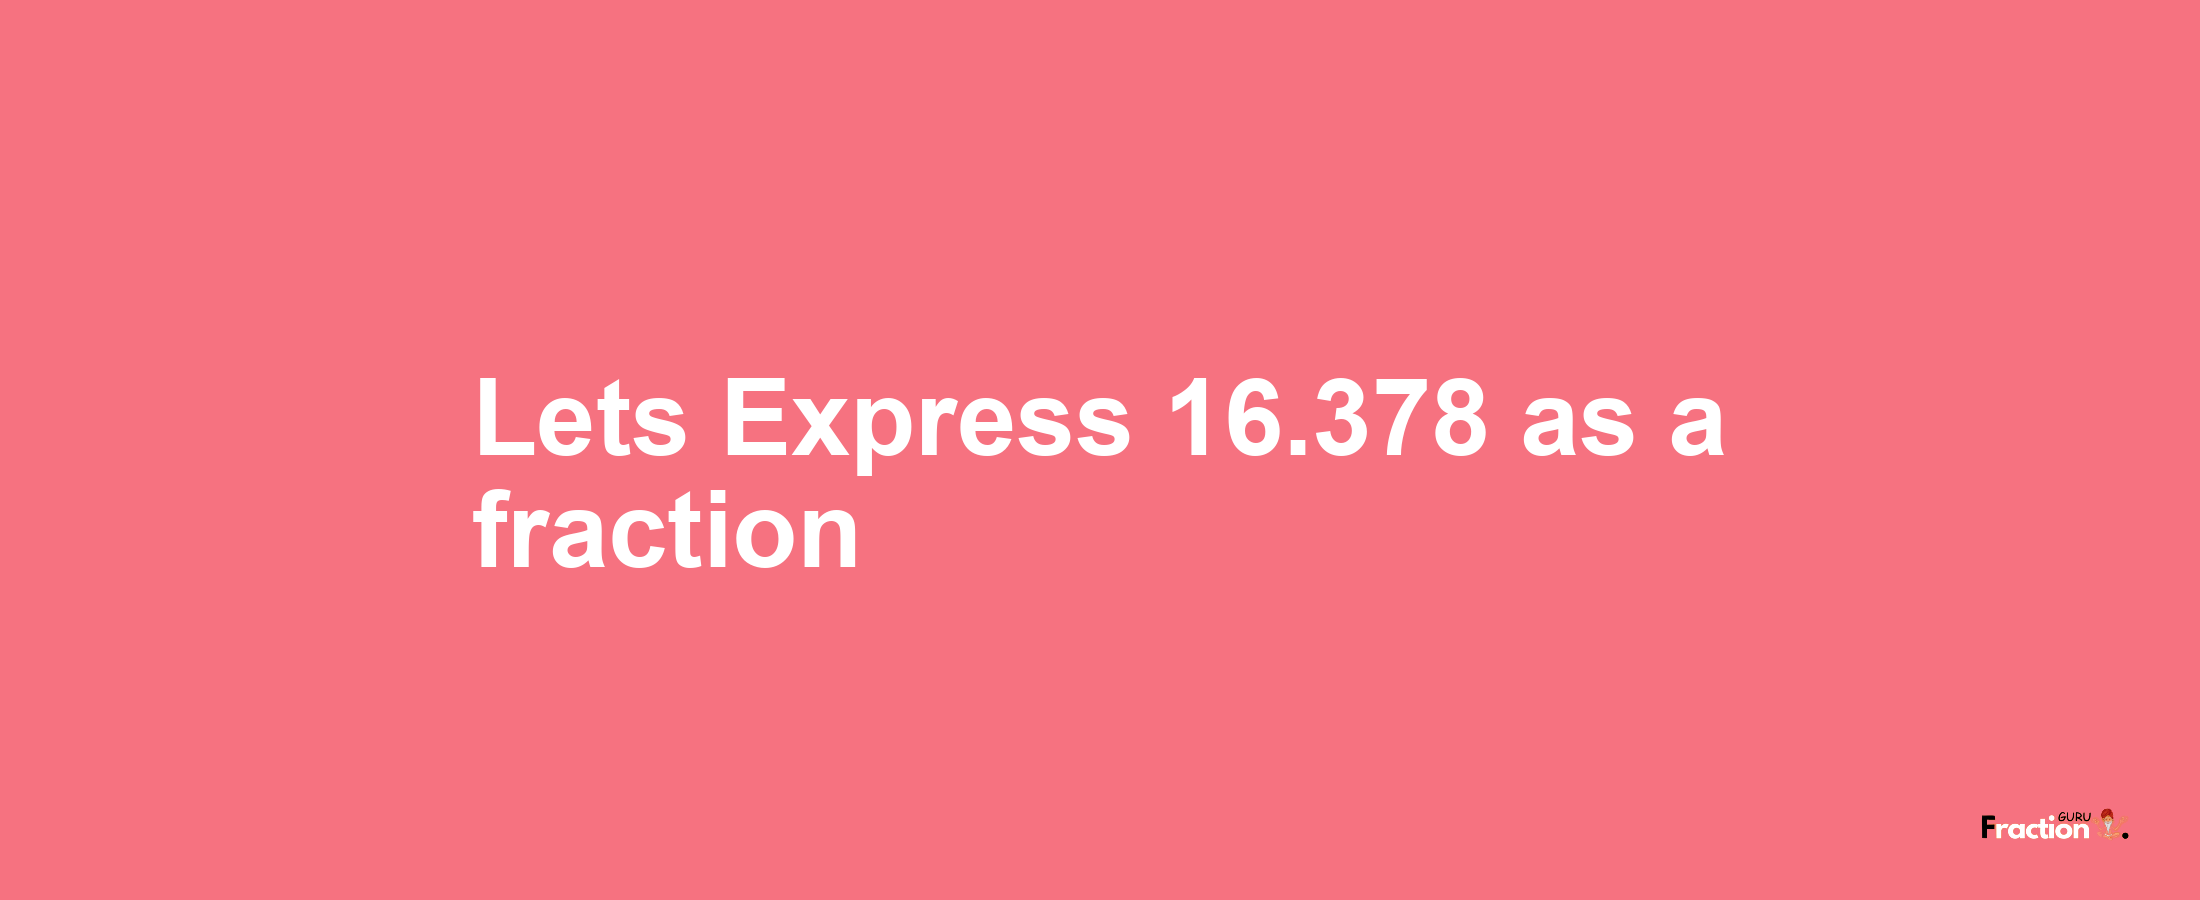 Lets Express 16.378 as afraction